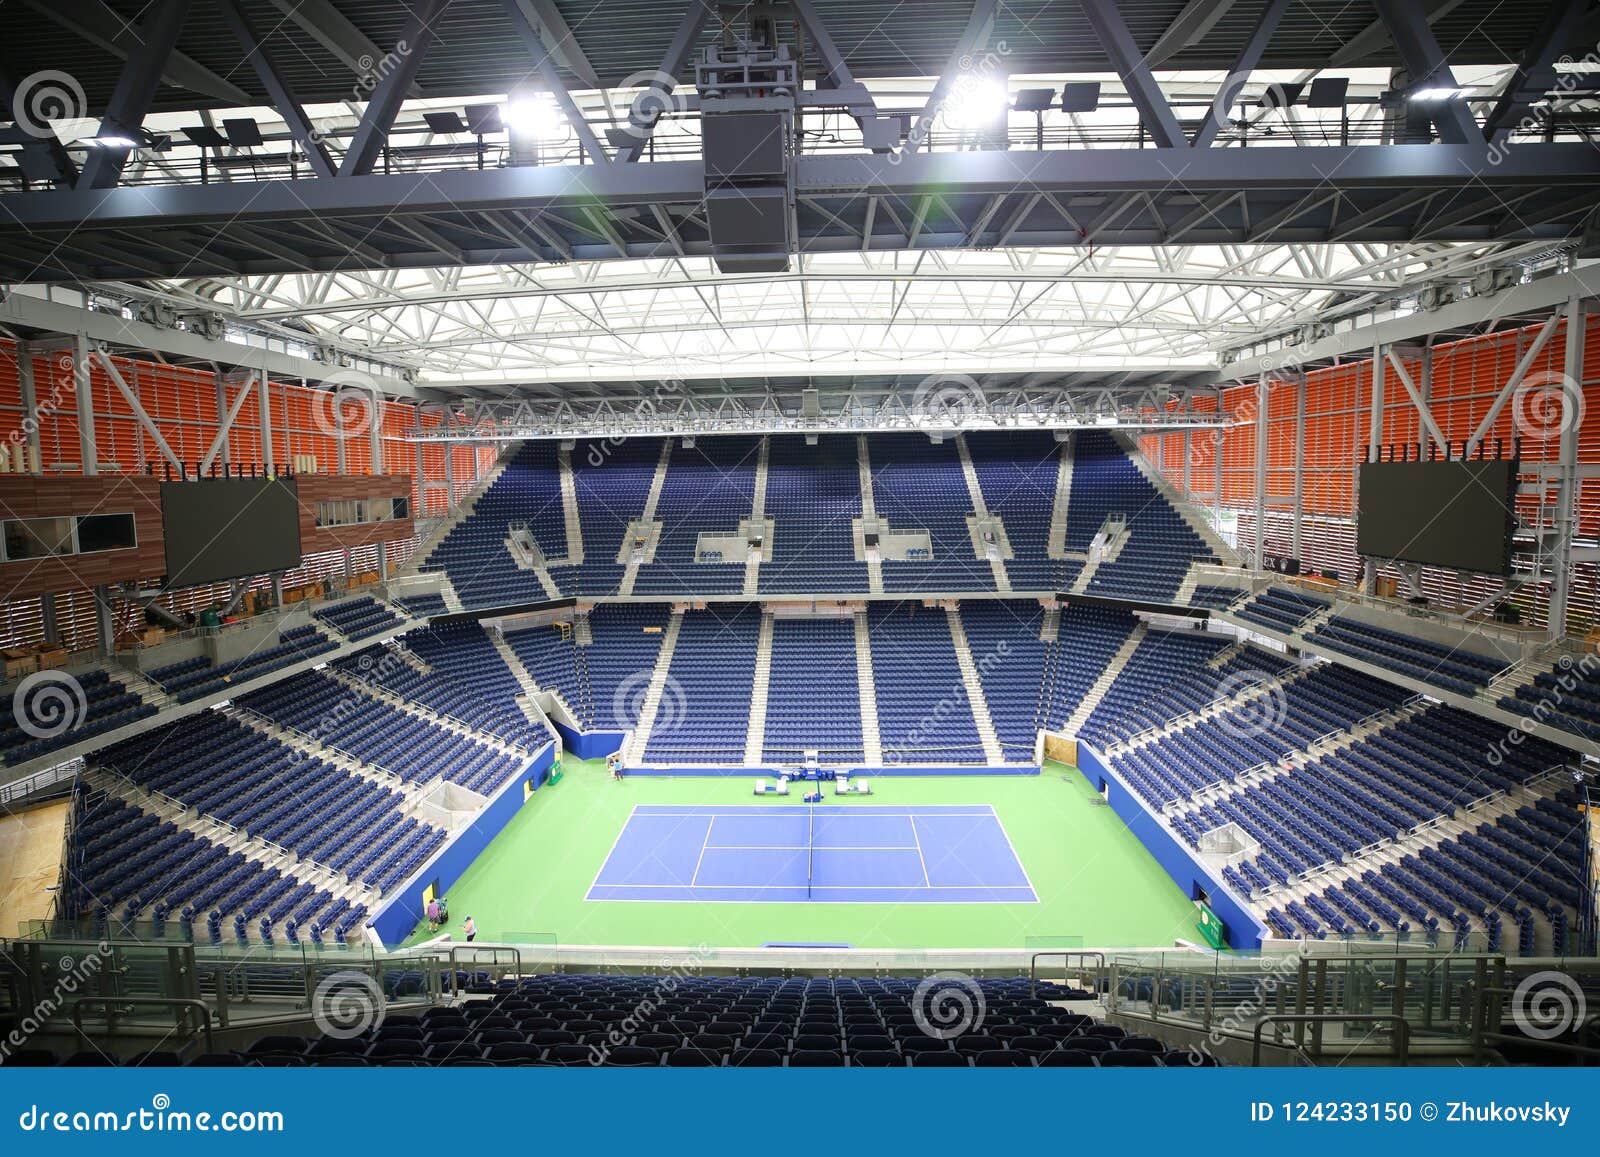 The New, Roofed Louis Armstrong Stadium Is Set To Debut At 2018 U.S. Open At The Billie Jean ...